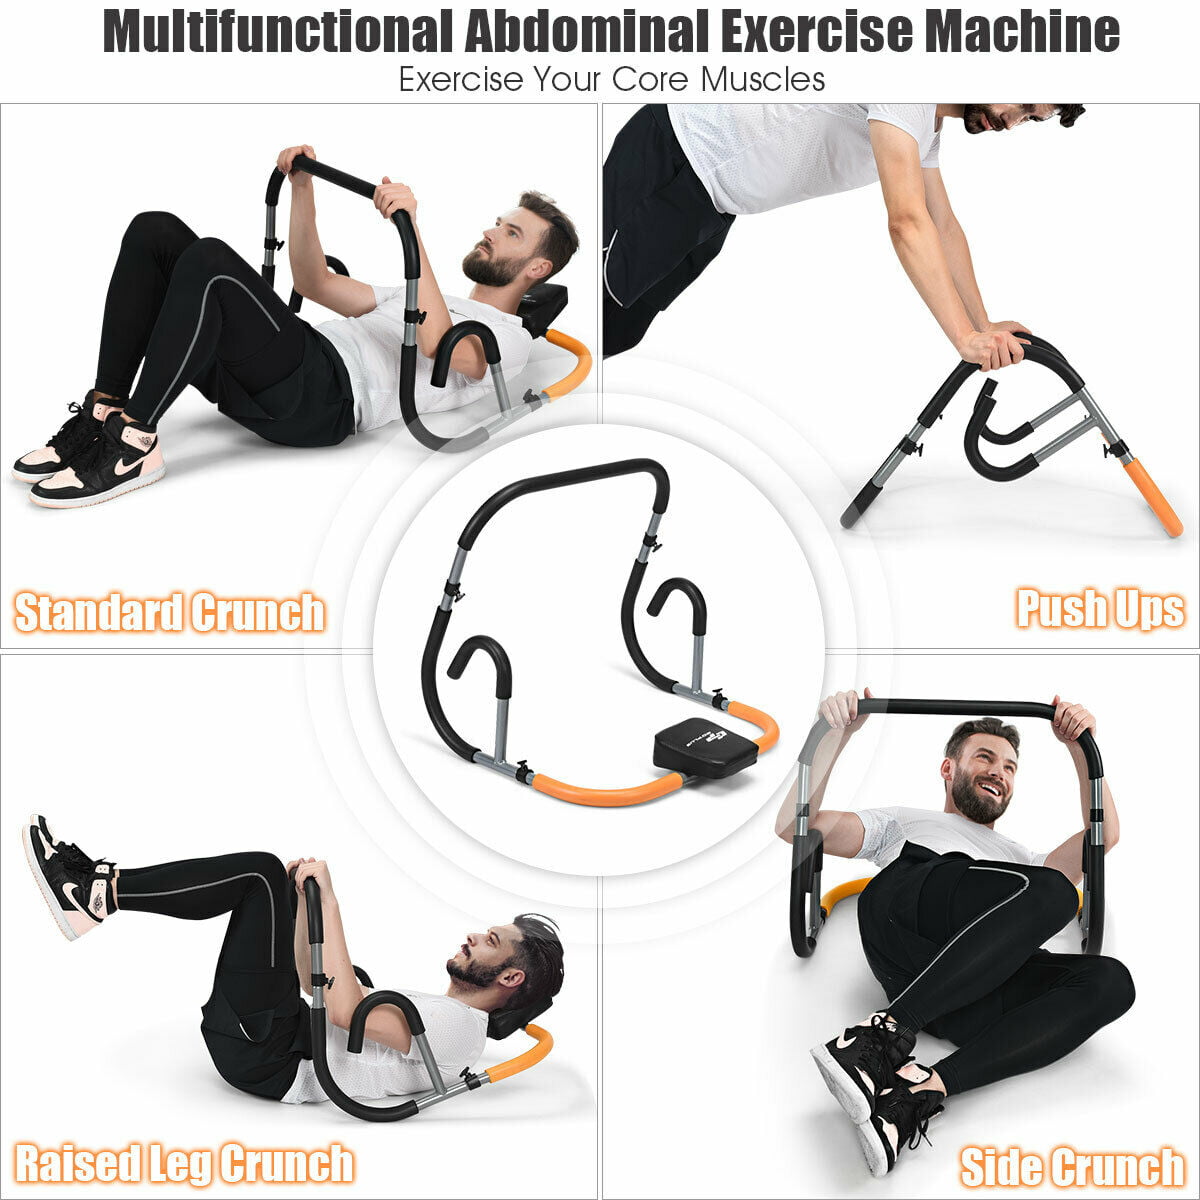 Details about   New Ab Fitness Crunch Abdominal Exercise Workout Machine Glider Roller Pushup